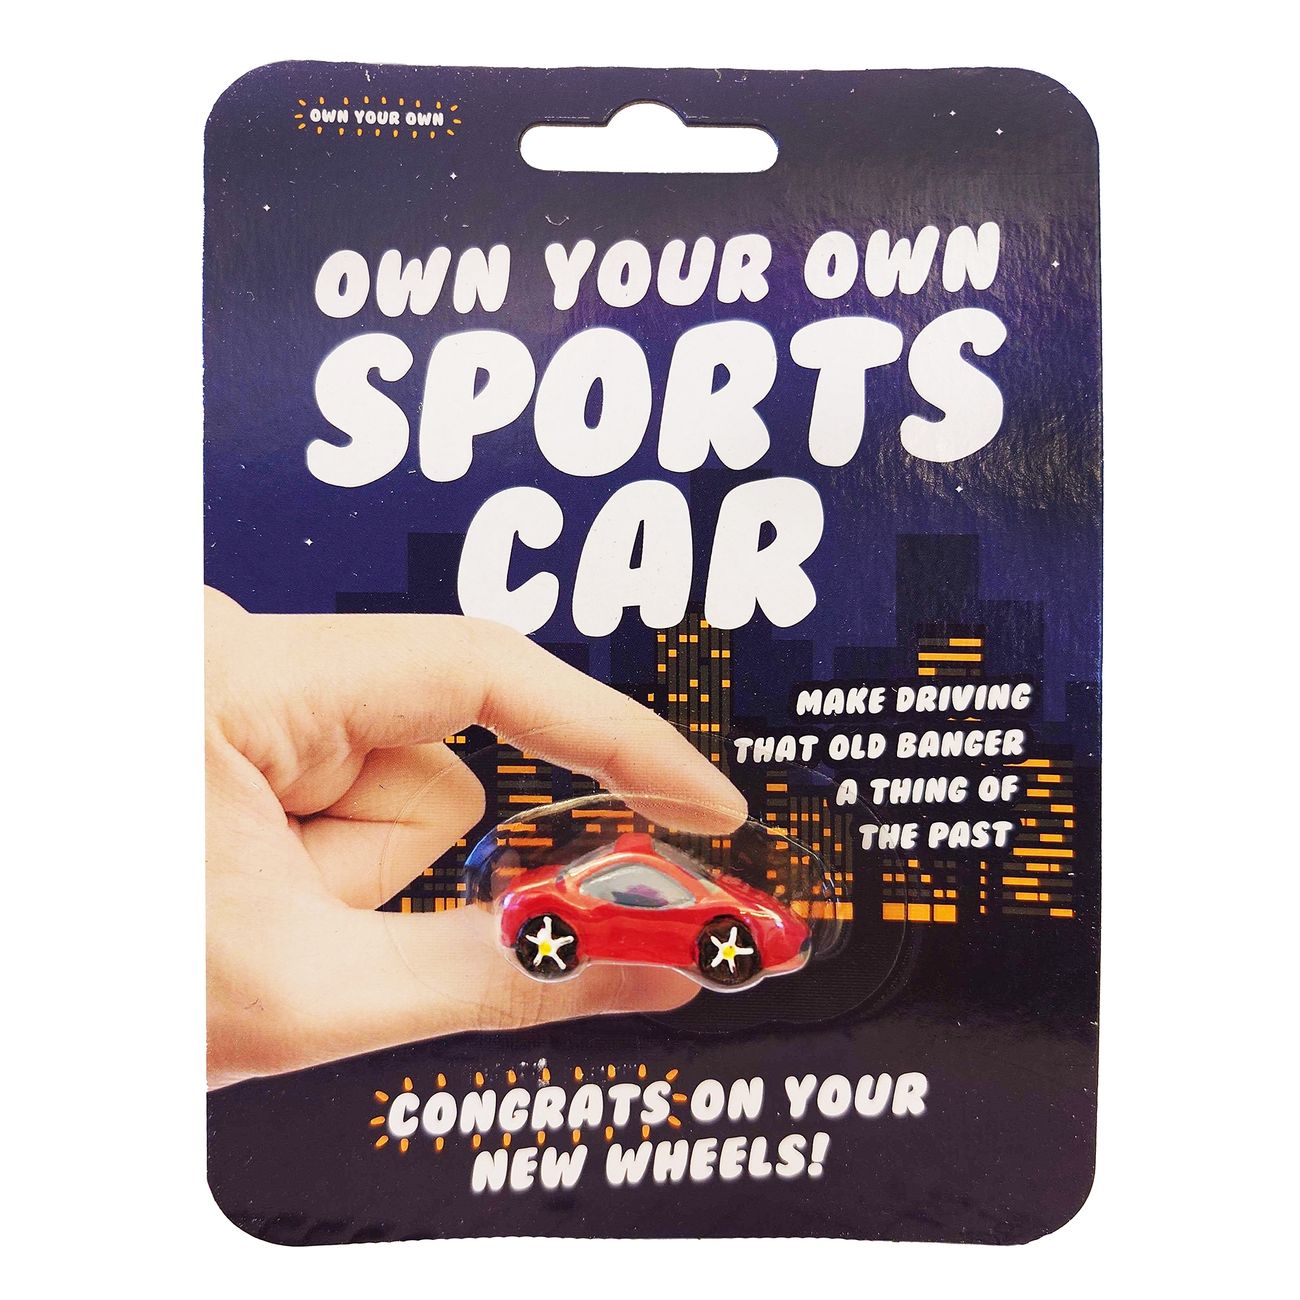 own-your-own-sports-car-35cm-lang-92118-1